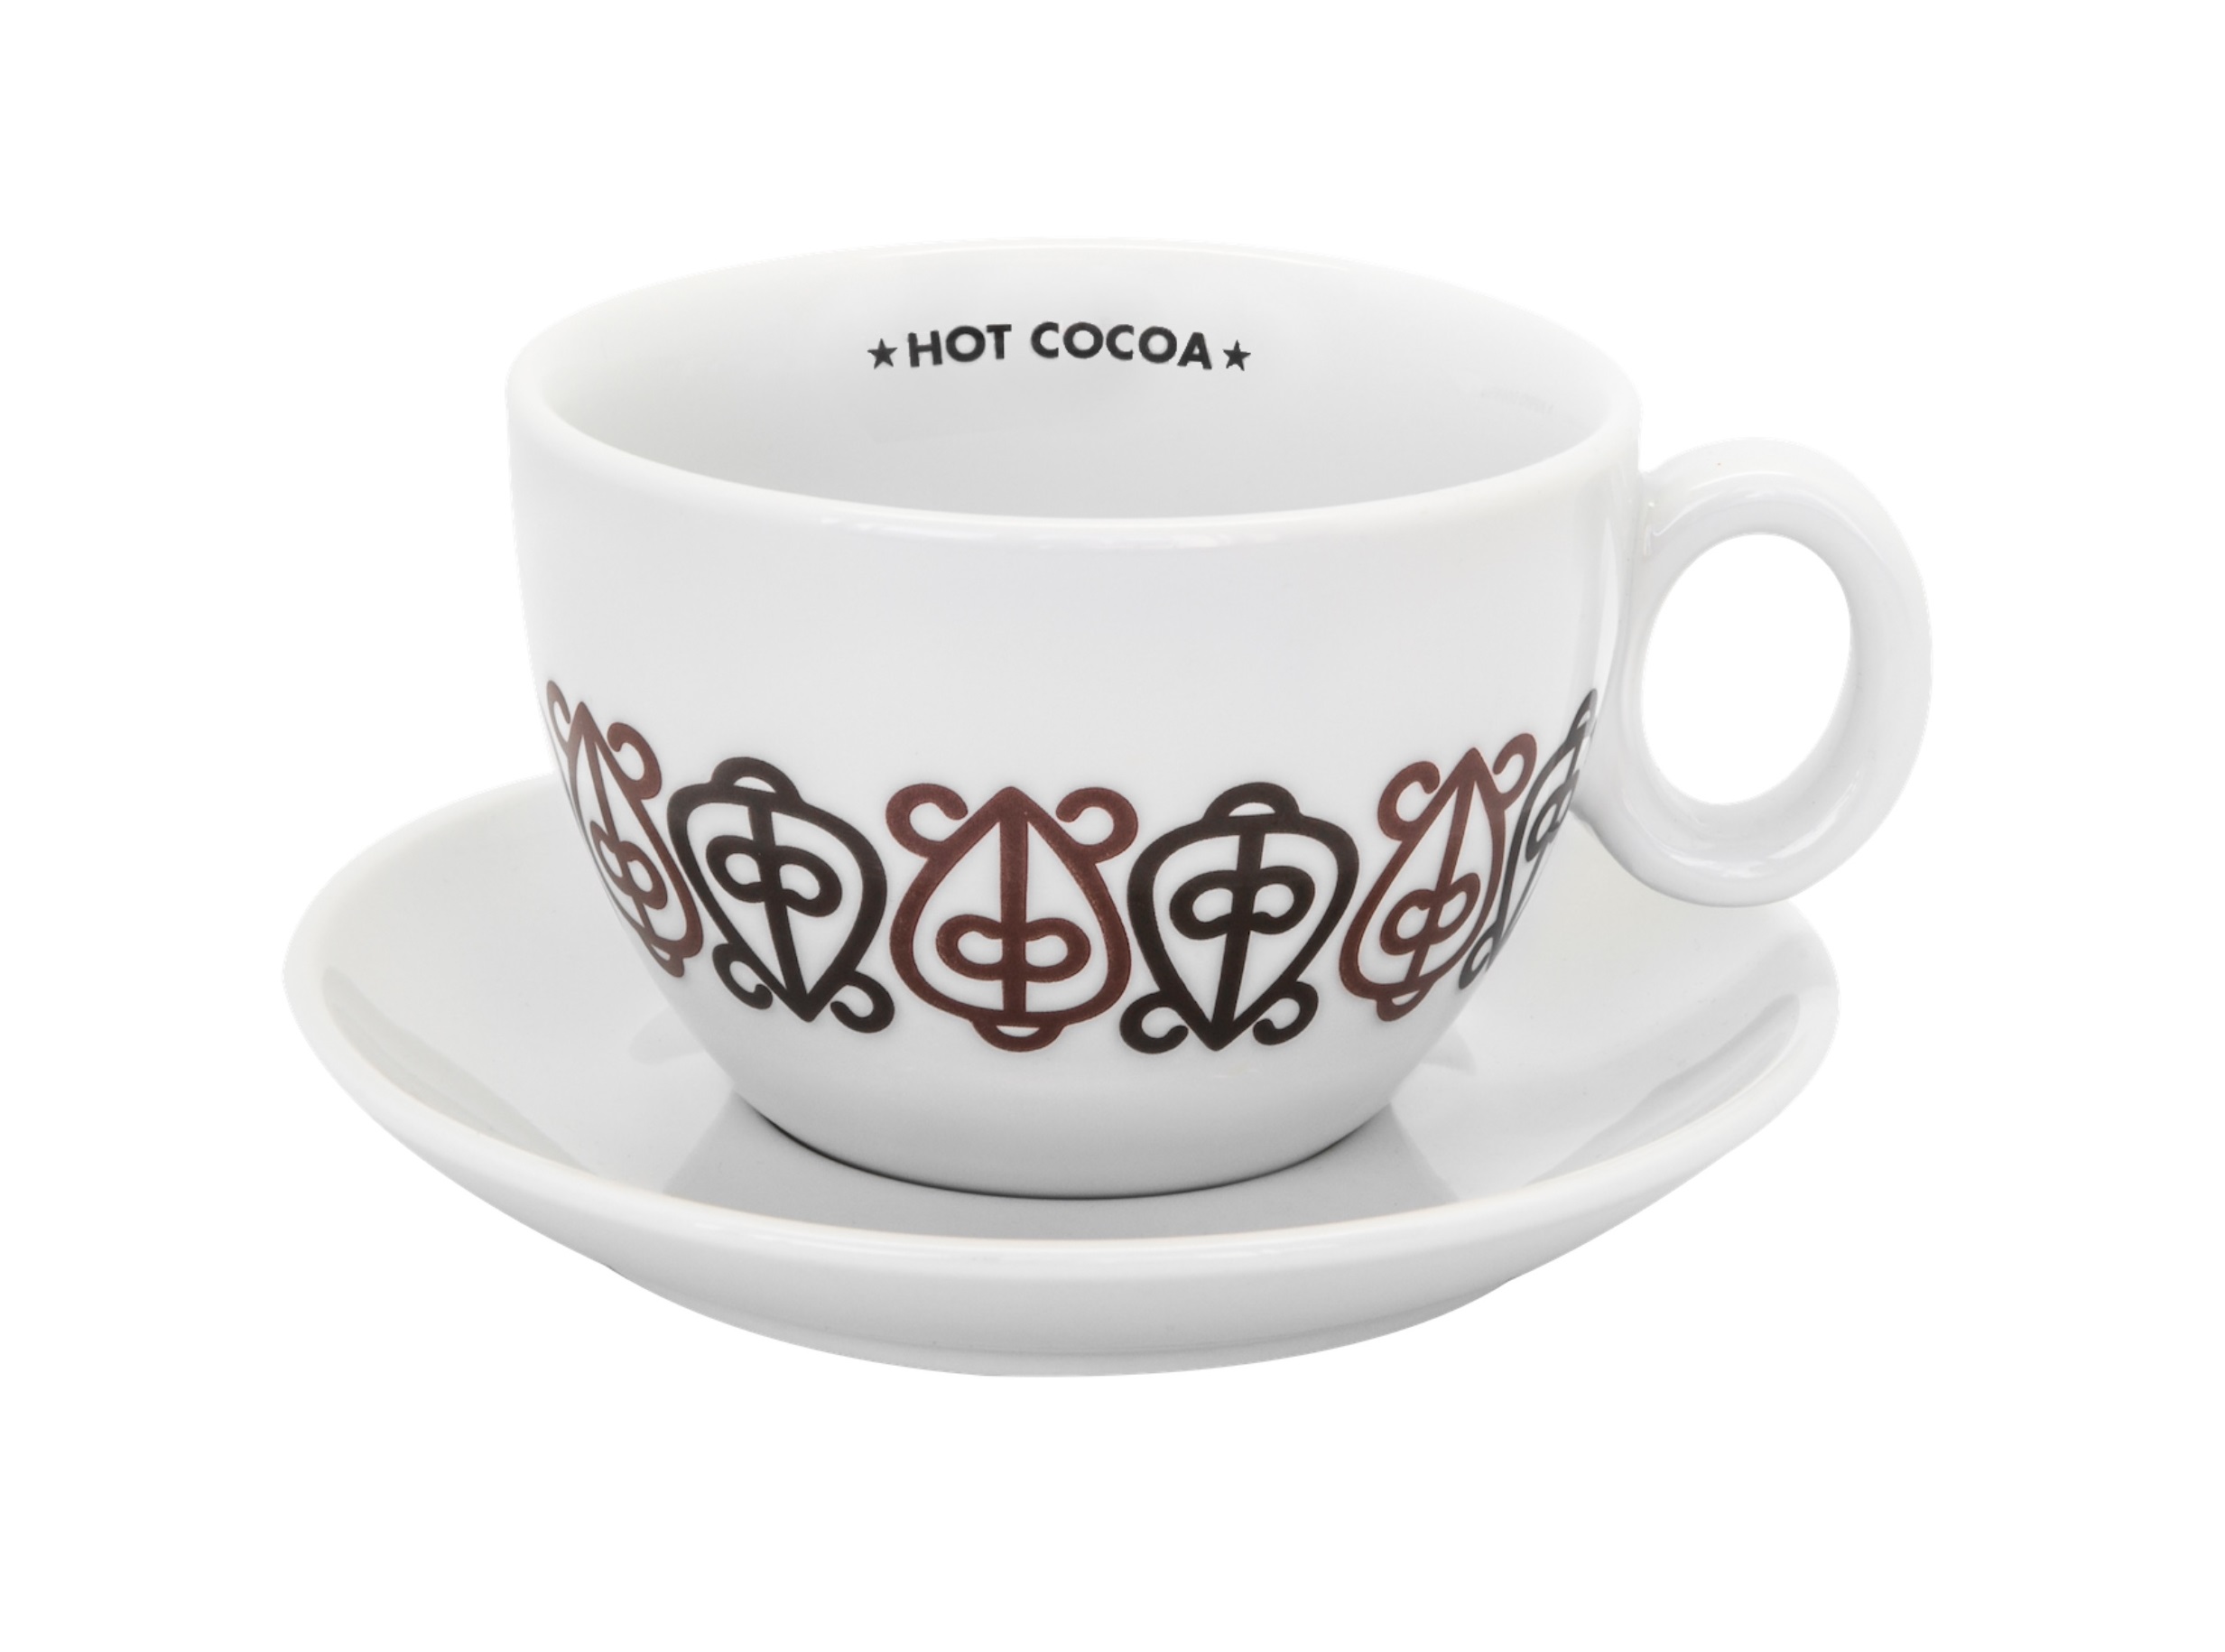 Hot Cocoa Cup - XL, 2nd edition